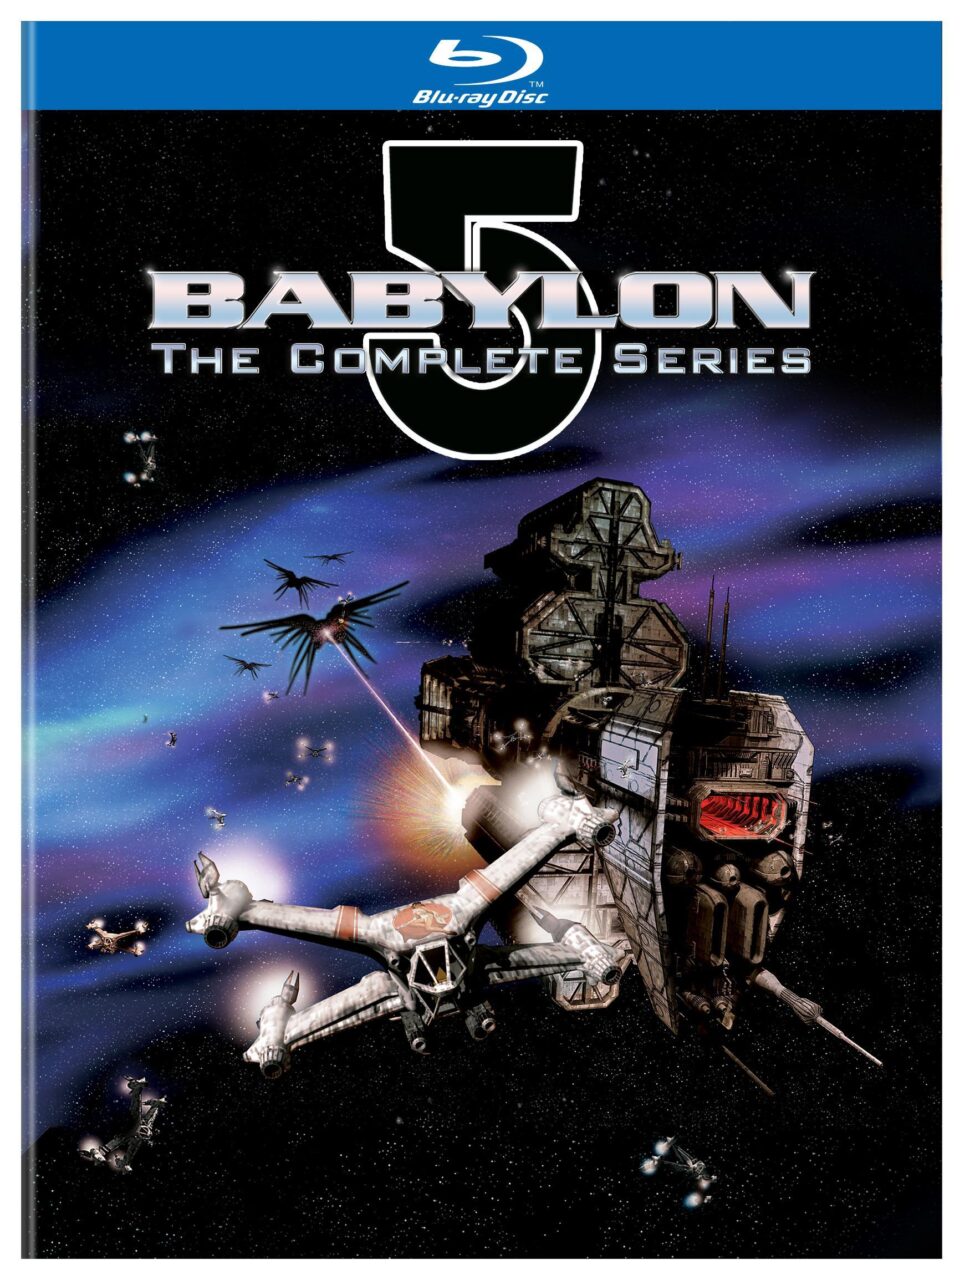 Babylon 5: The Complete Series Blu-Ray cover (Warner Bros. Discovery Home Entertainment)